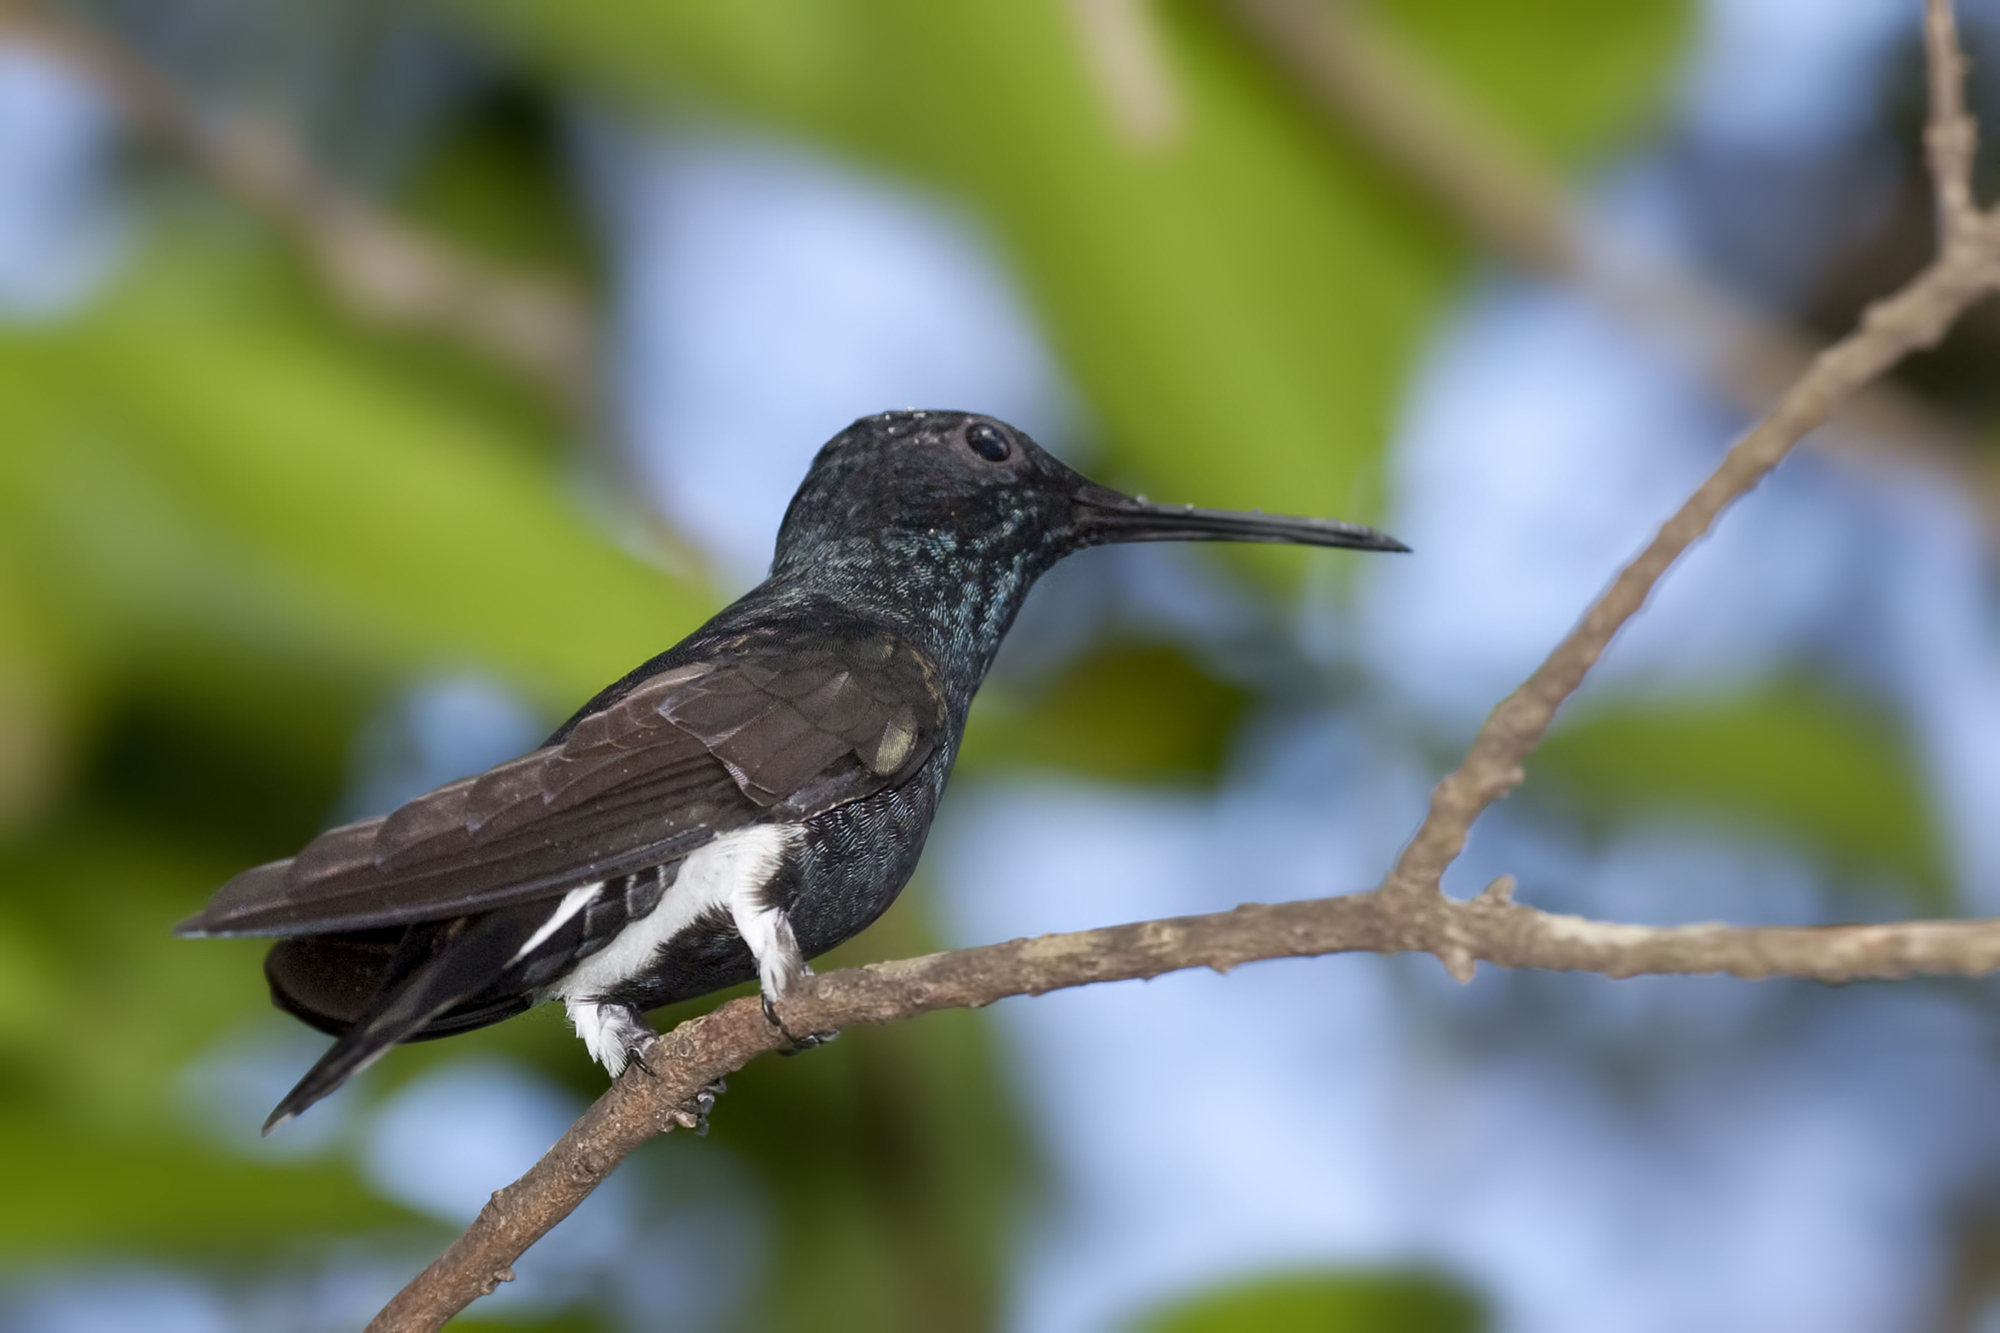 Hummingbirds routinely hit 9Gs like it’s no big deal